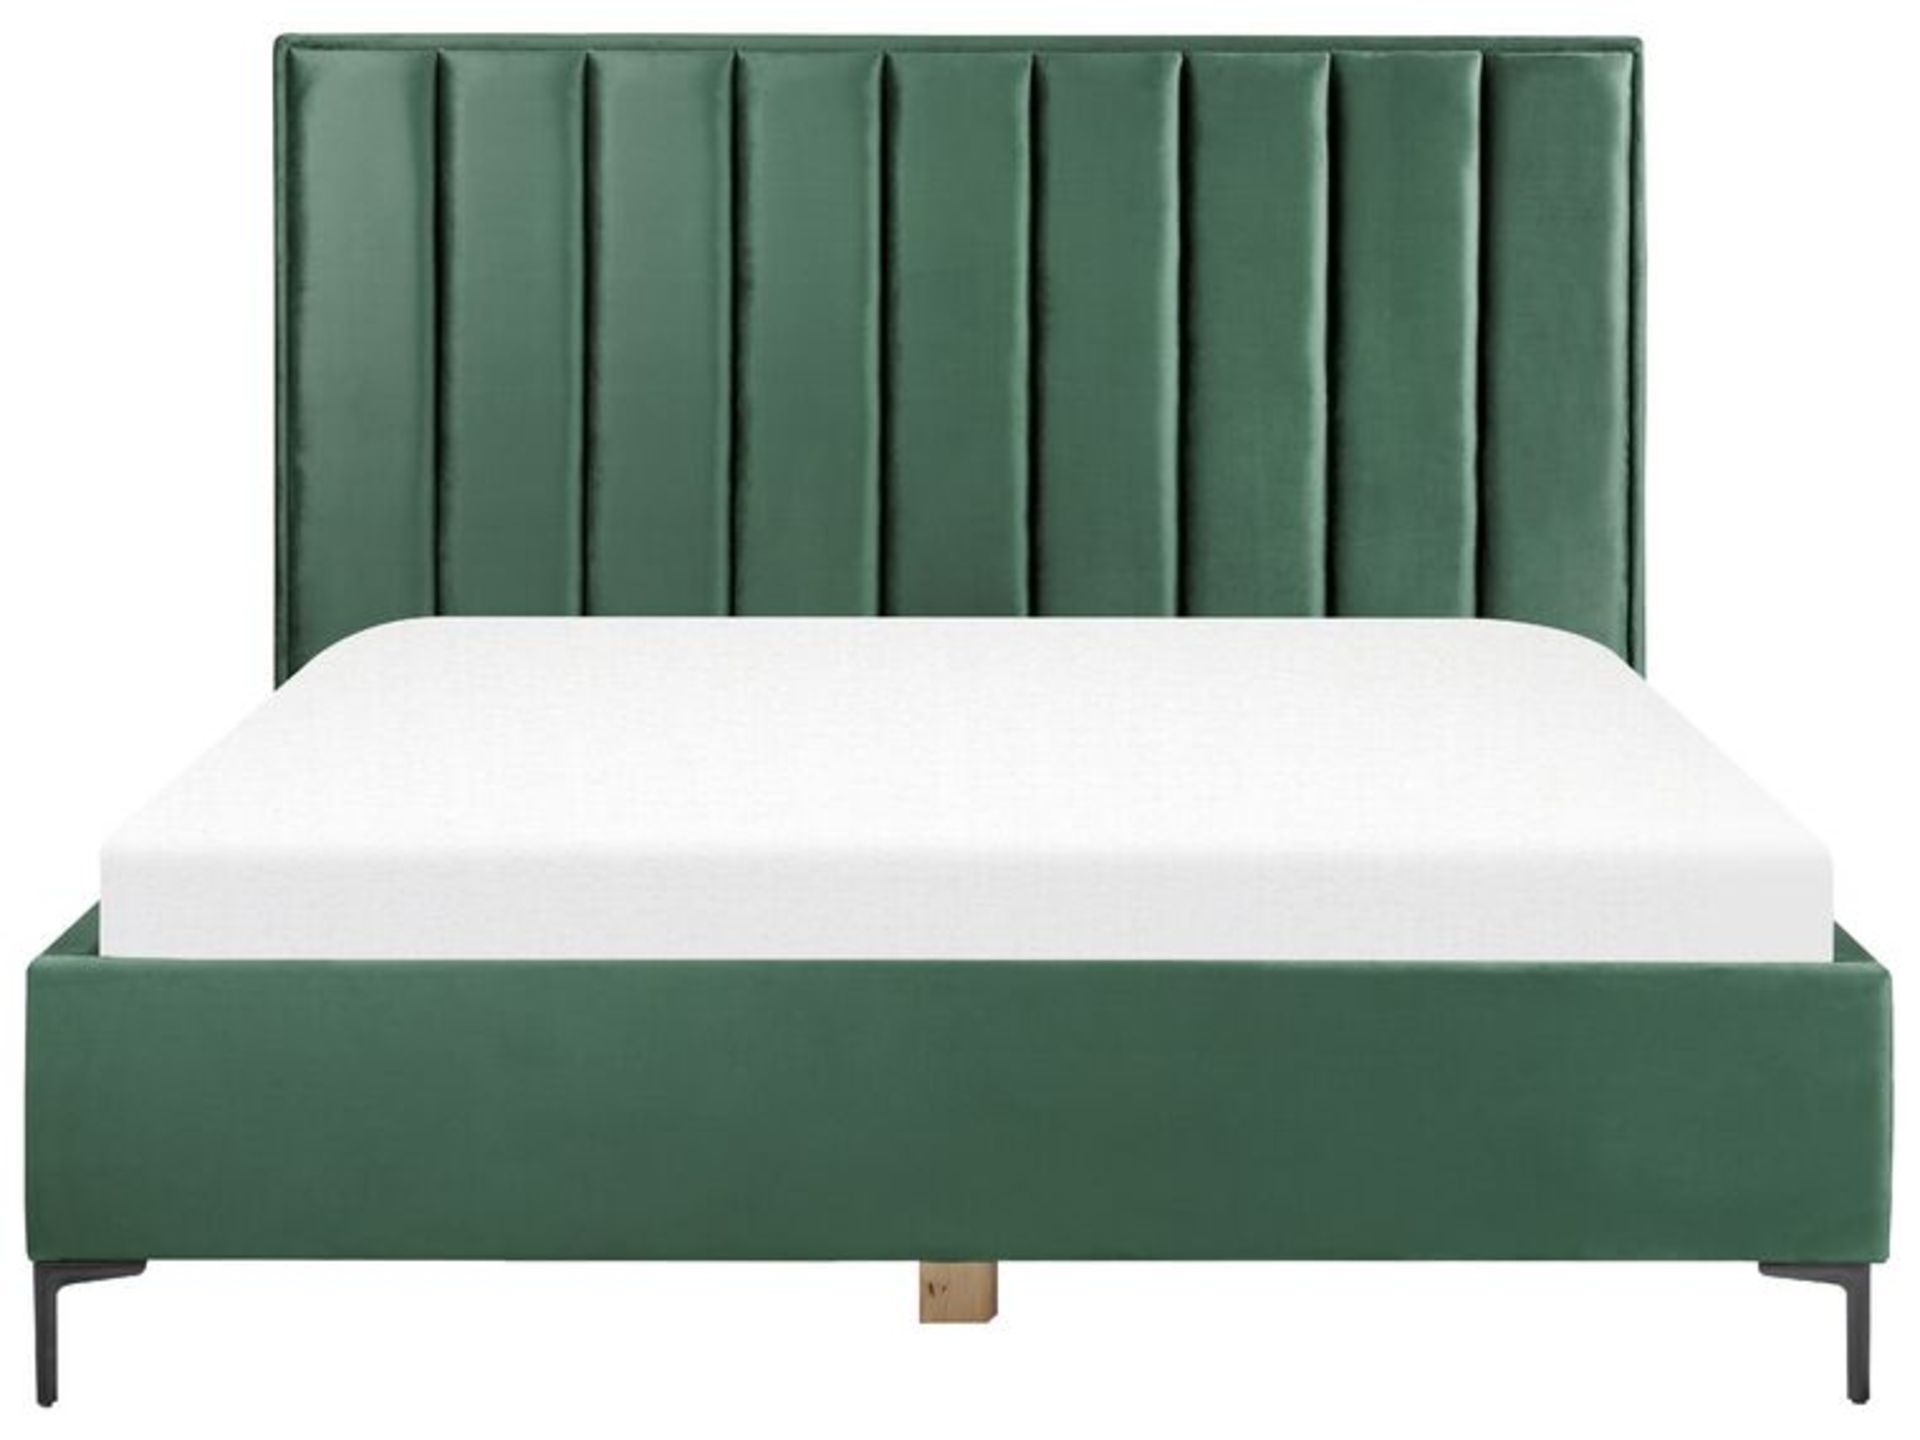 Sezanne Velvet EU Super King Size Ottoman Bed Dark Green. - R14. RRP £819.99. This beautiful bed